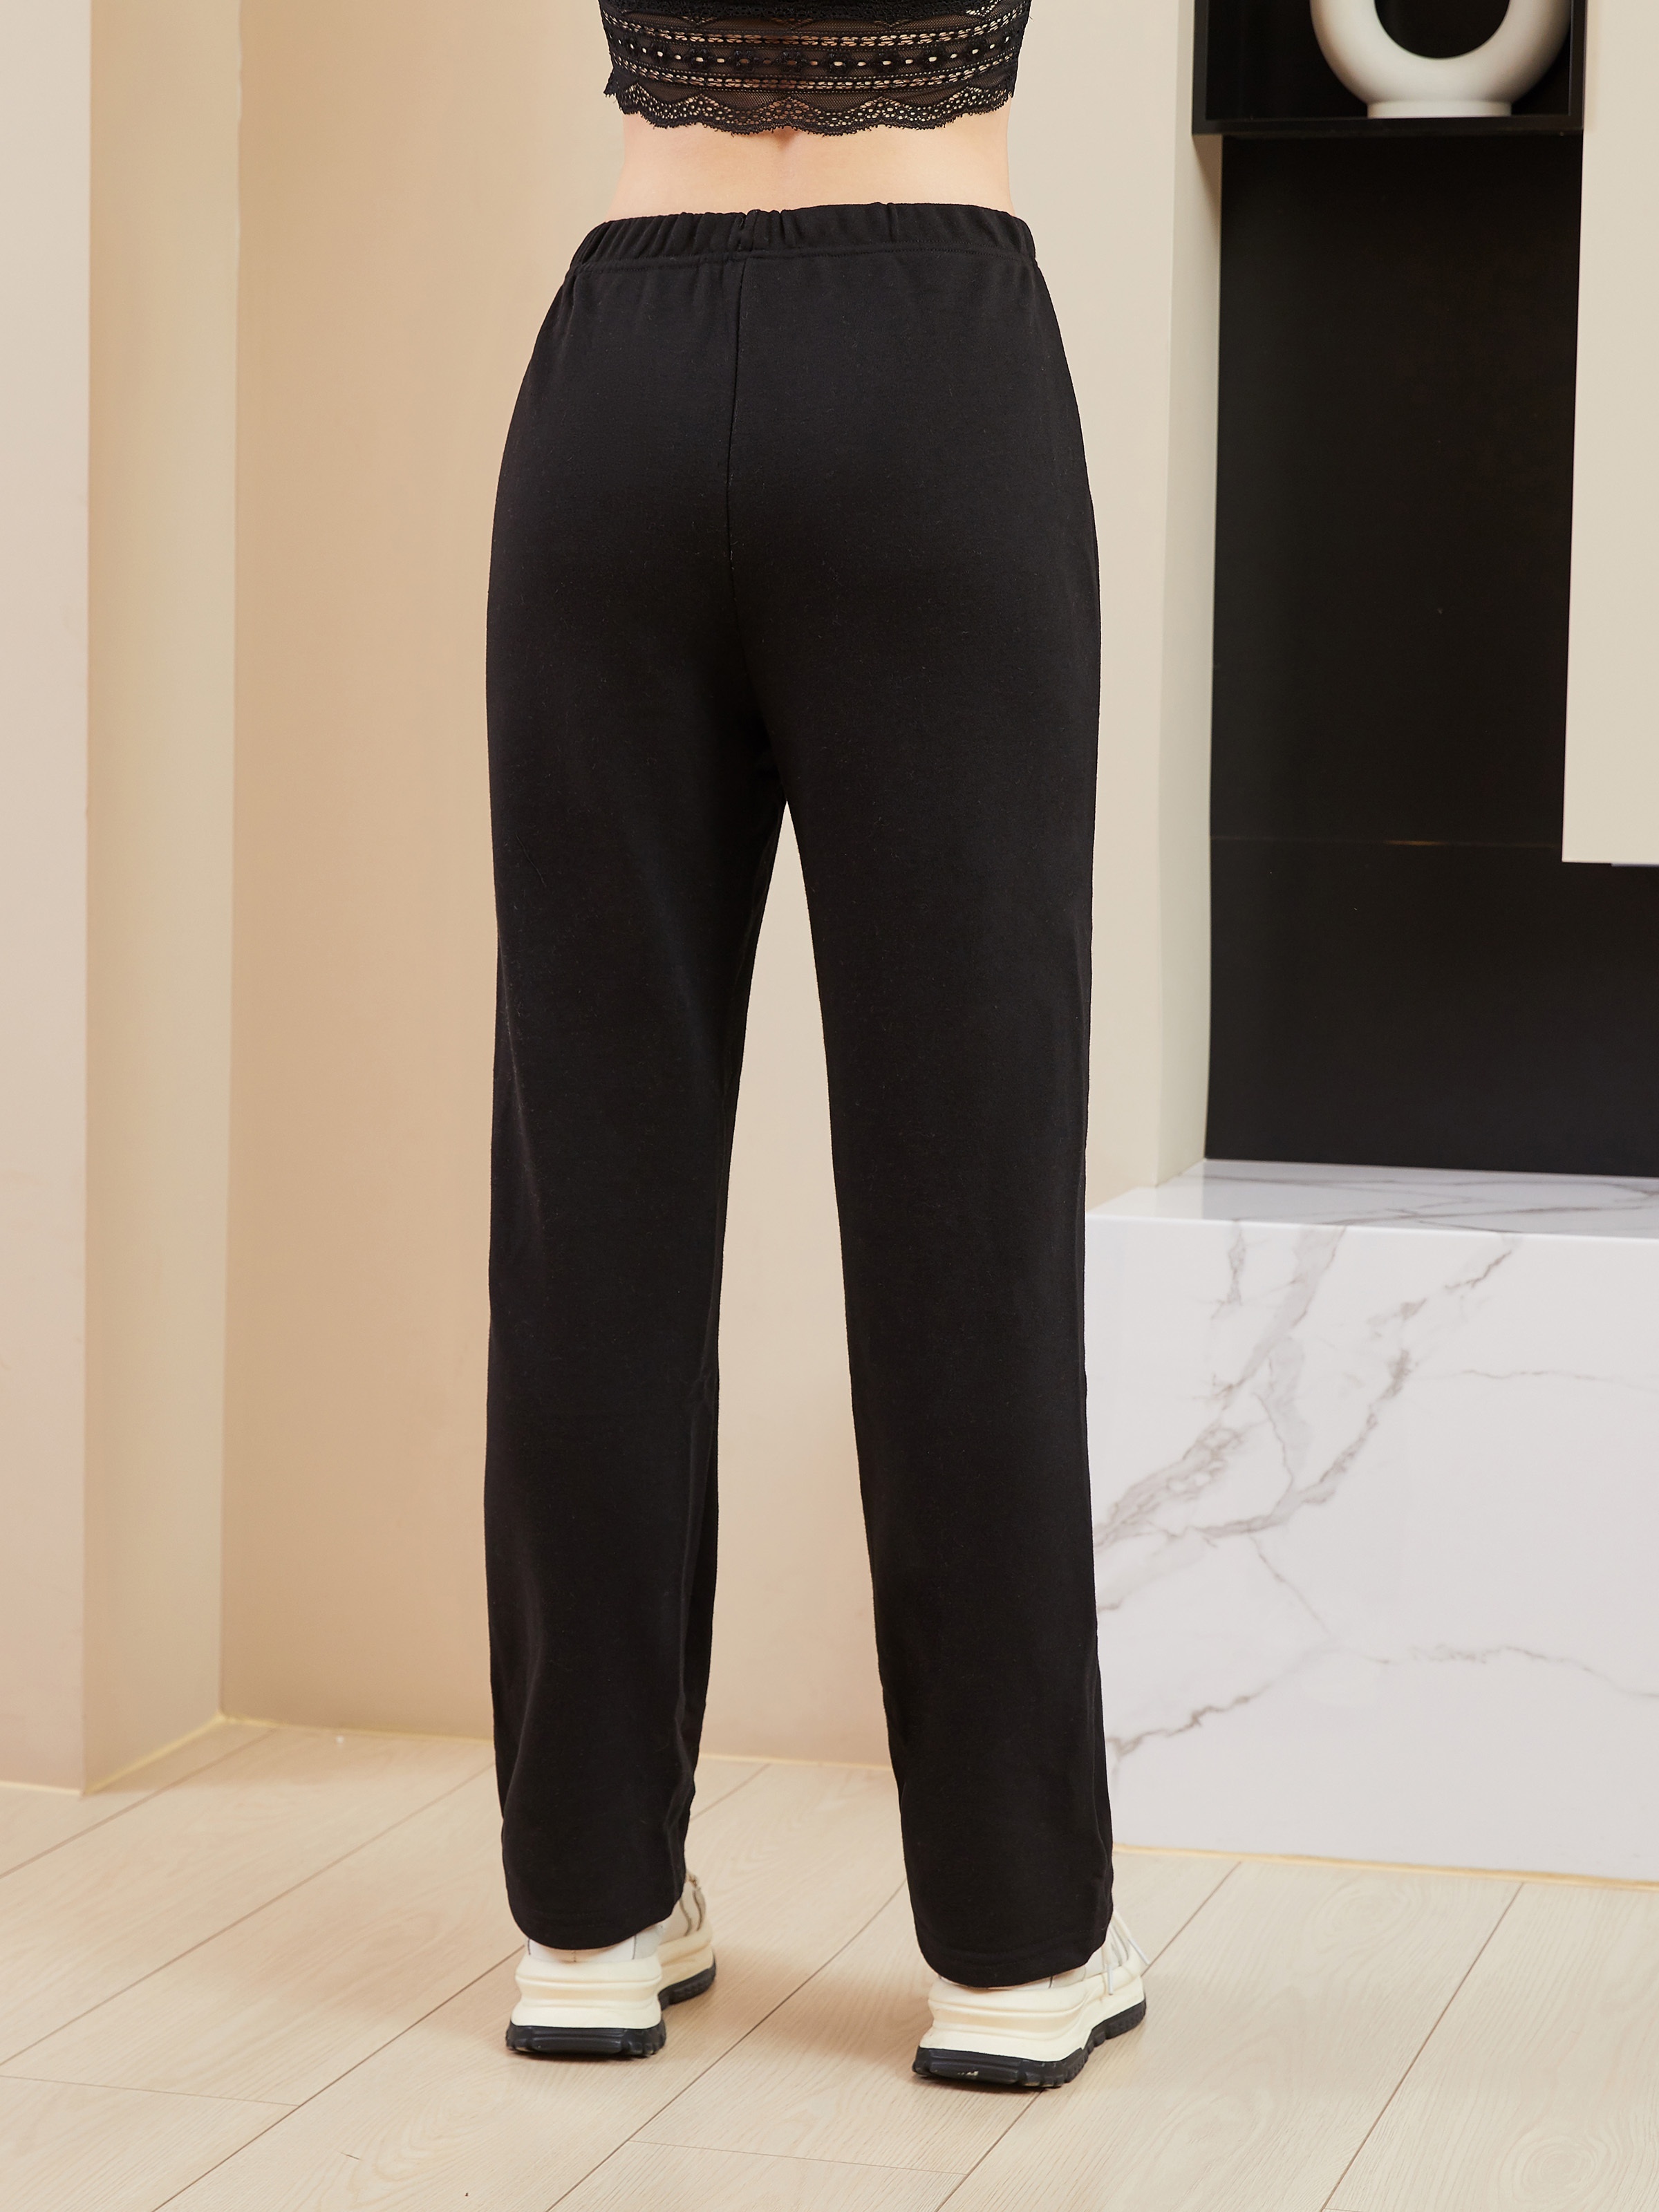 Wide Legs Pants for Women High Waisted Straight Pants Elegant Slim Long  Trousers